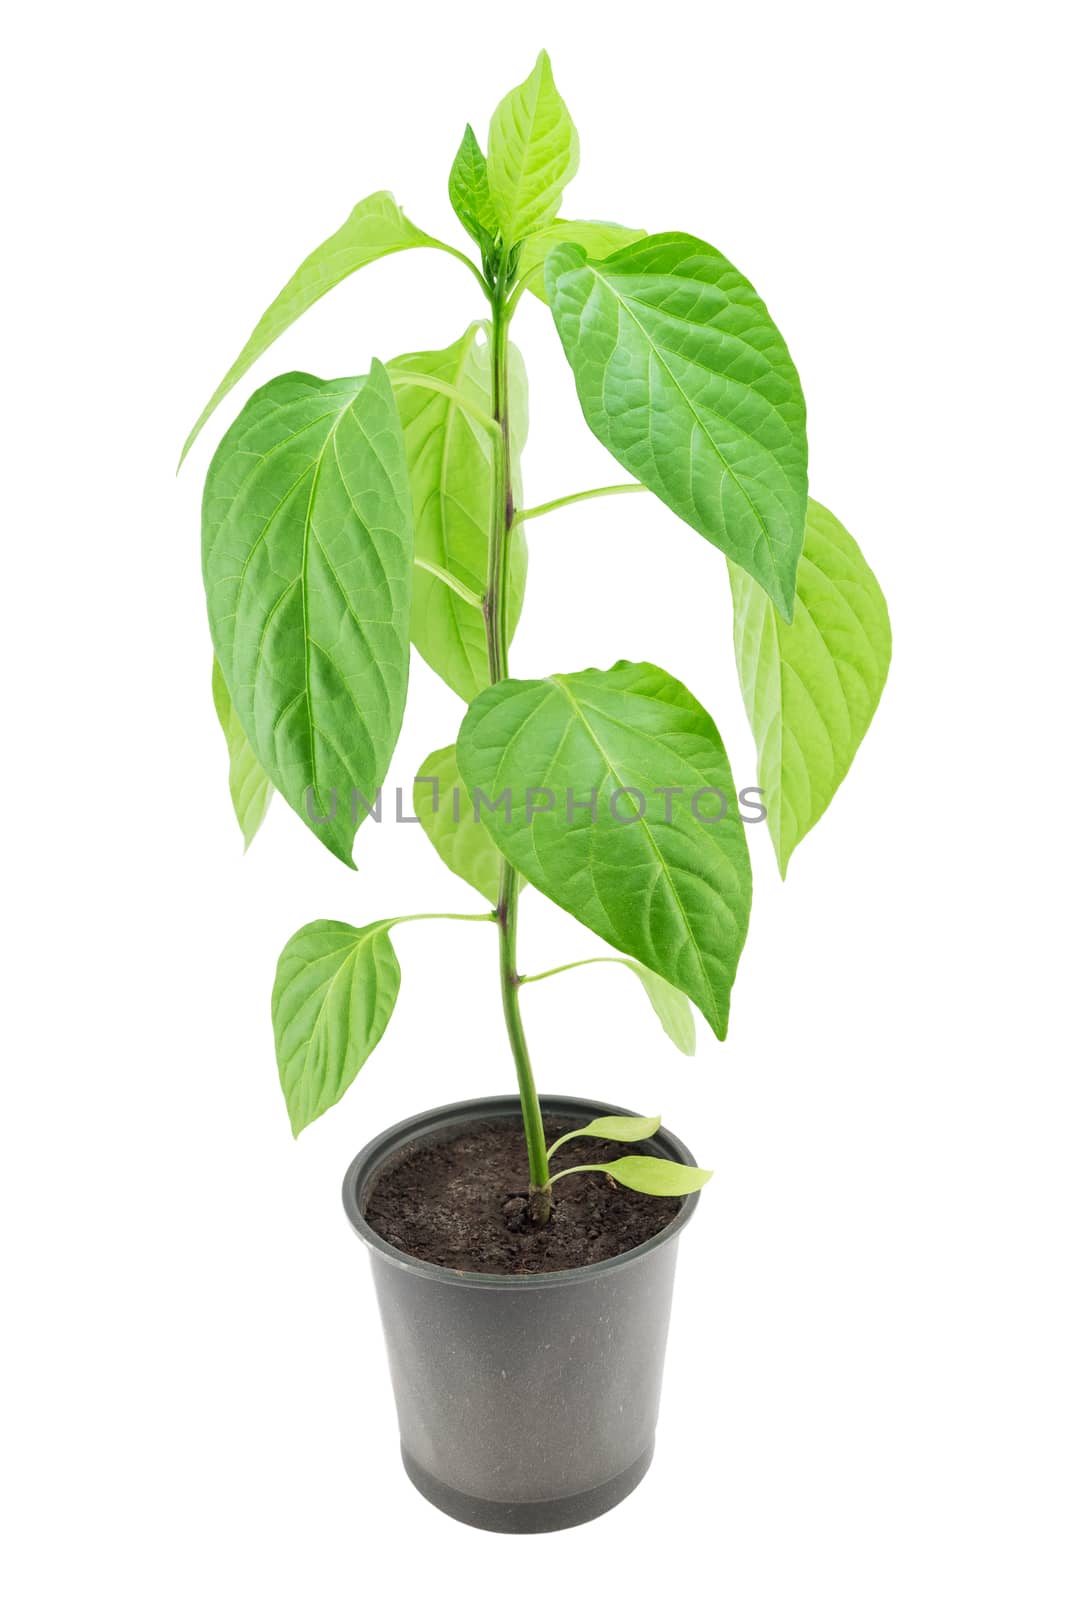 Pepper seedling isolated on a white background 